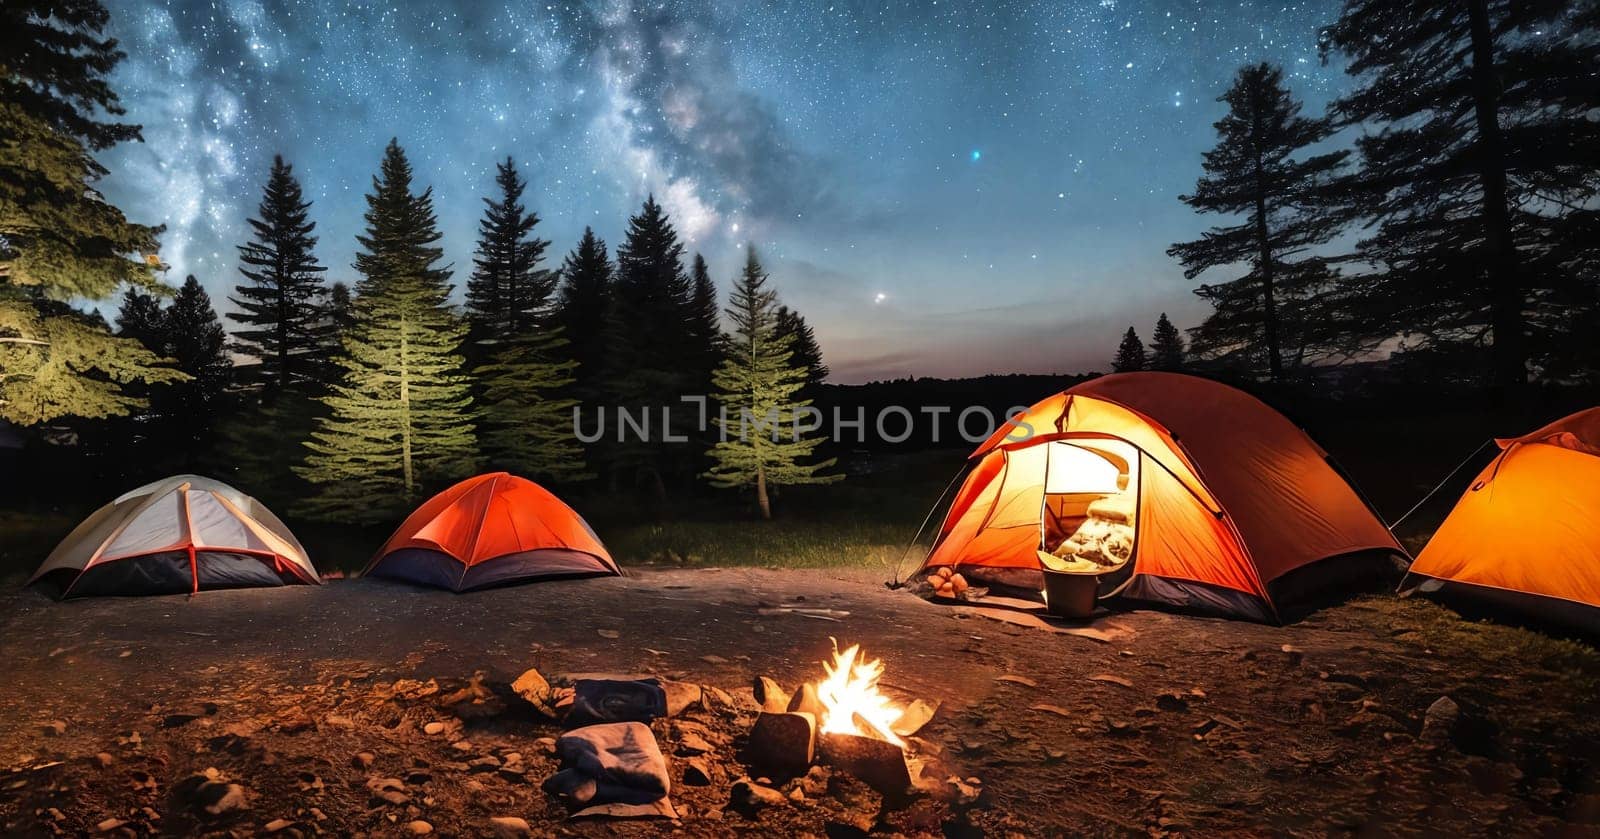 Campsite Coziness. Set up a cozy camping scene with a tent pitched under the starry night sky, illuminated by a warm campfire. Panorama